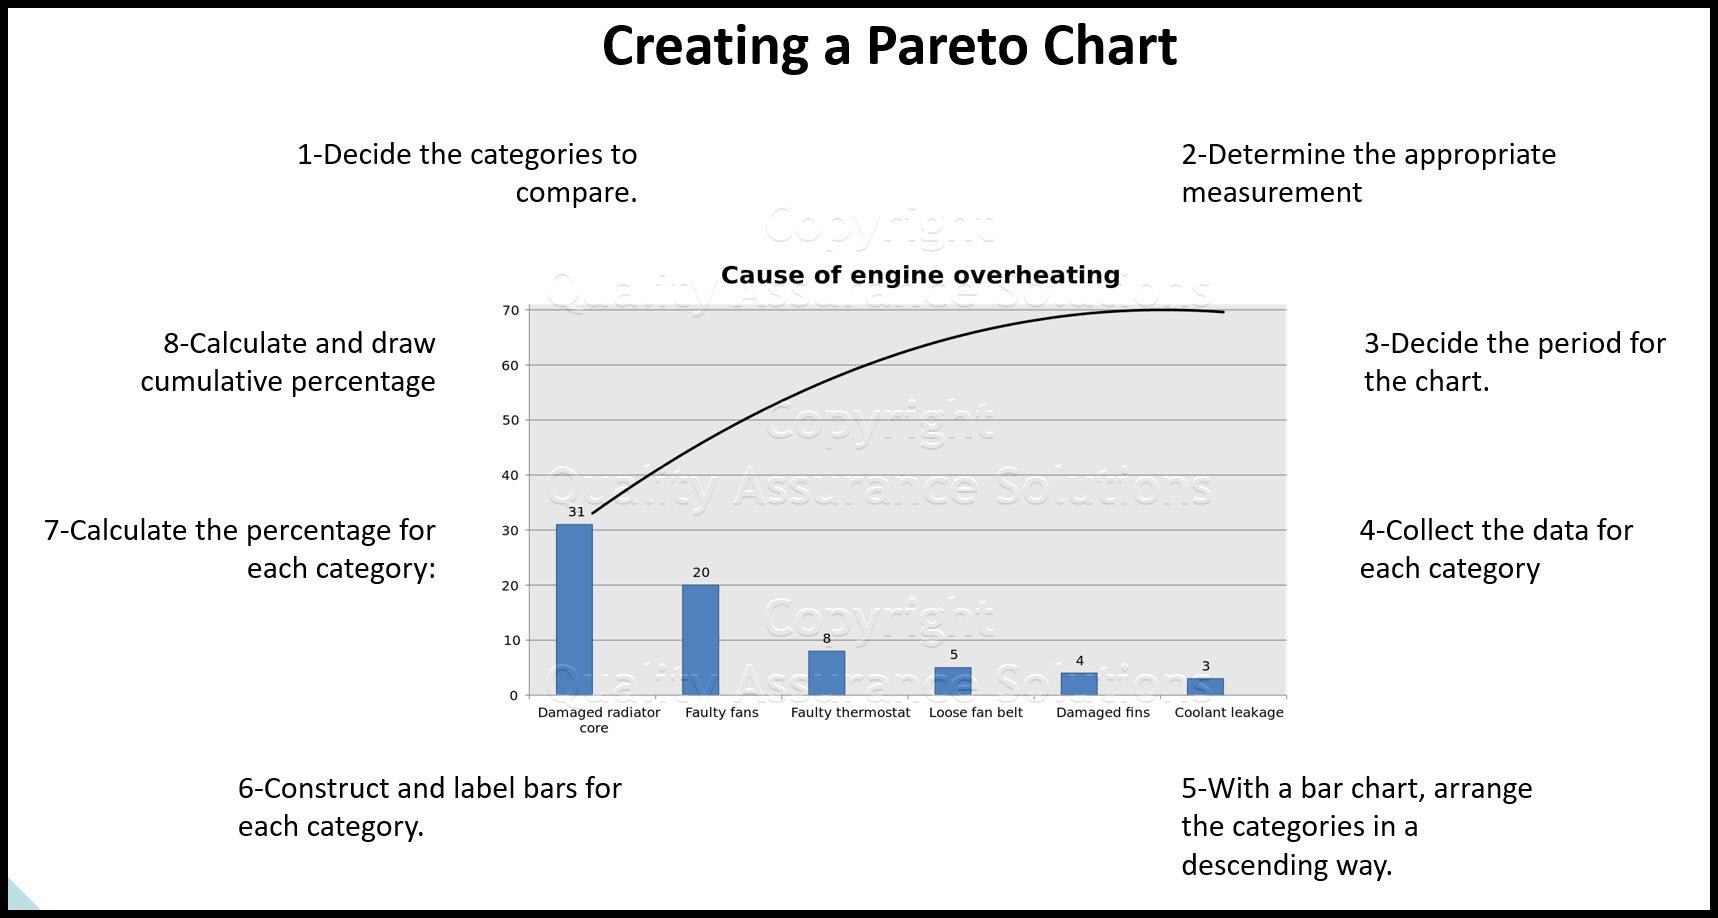 The Pareto chart is one of the total quality management tools and usually used during the define stage in six sigma